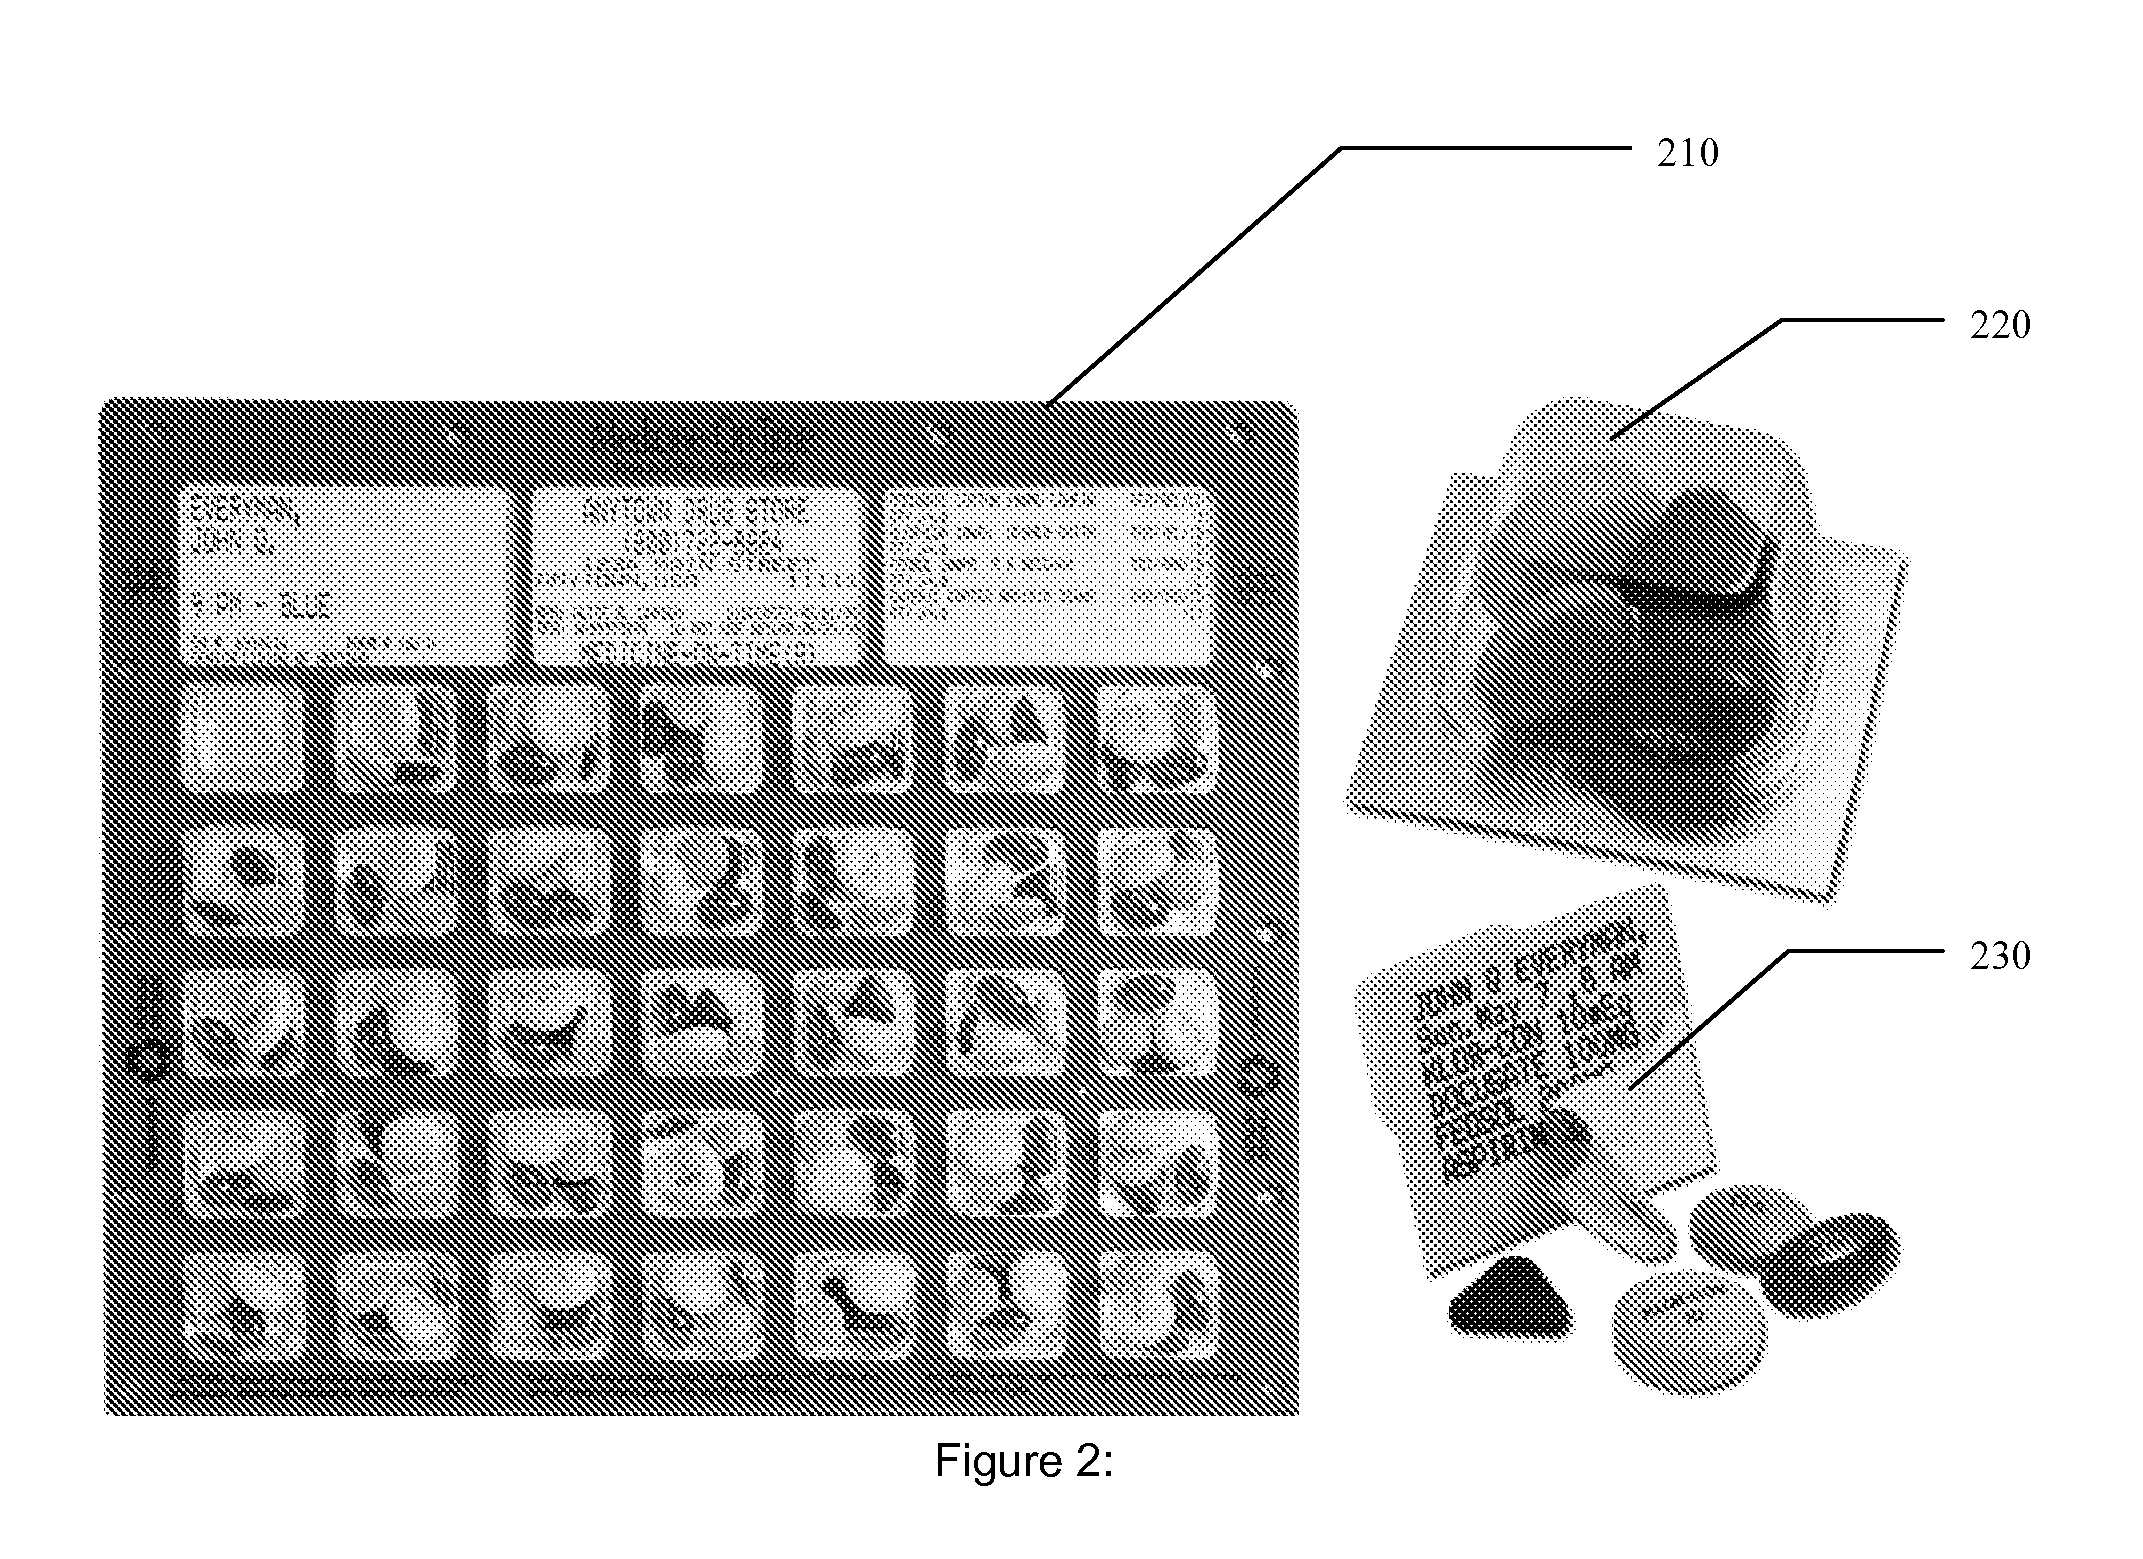 Method for detecting pill removals from pre-sorted medicine array packs